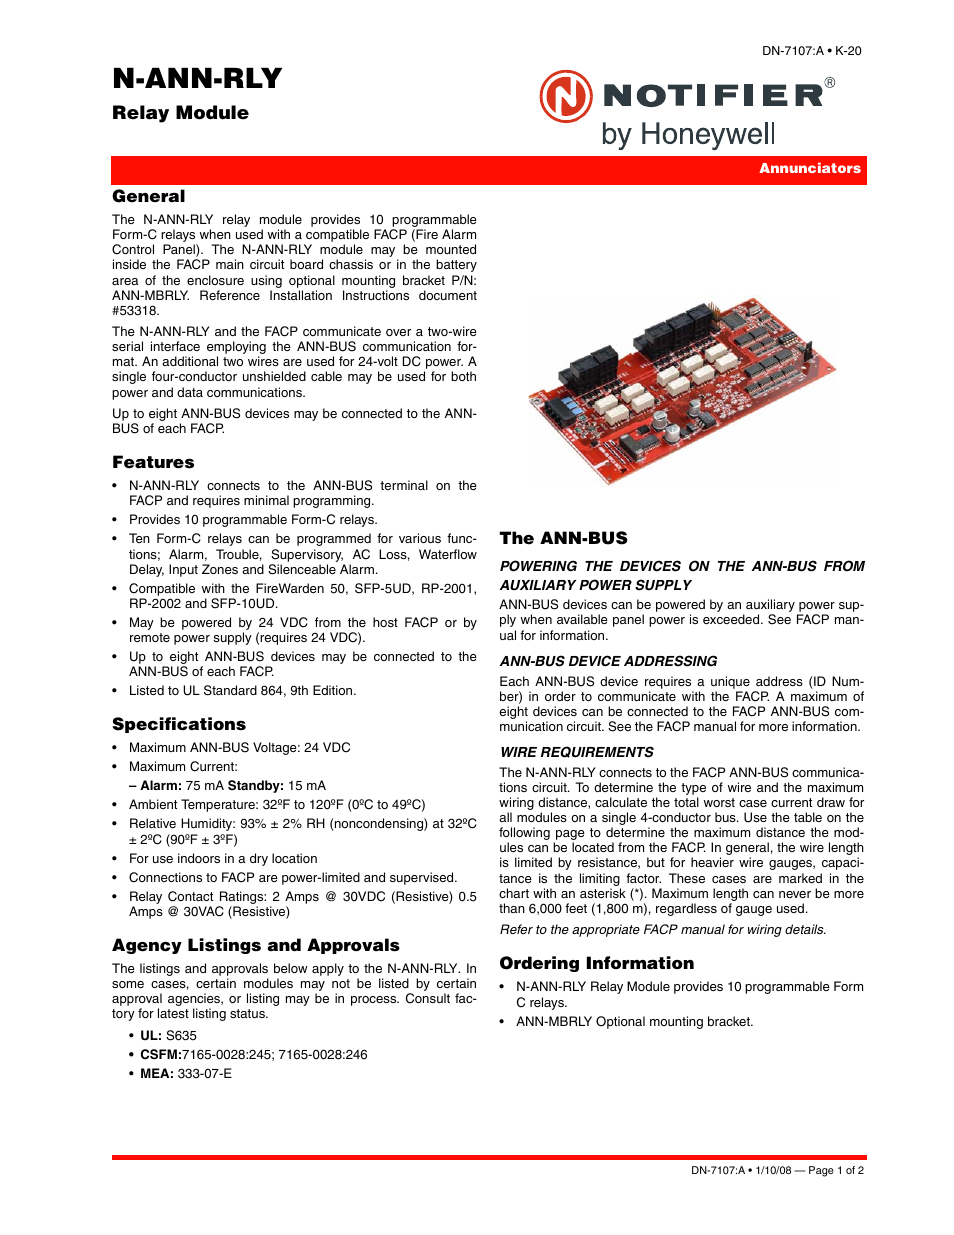 Honeywell N-ANN-RLY User Manual | 2 pages